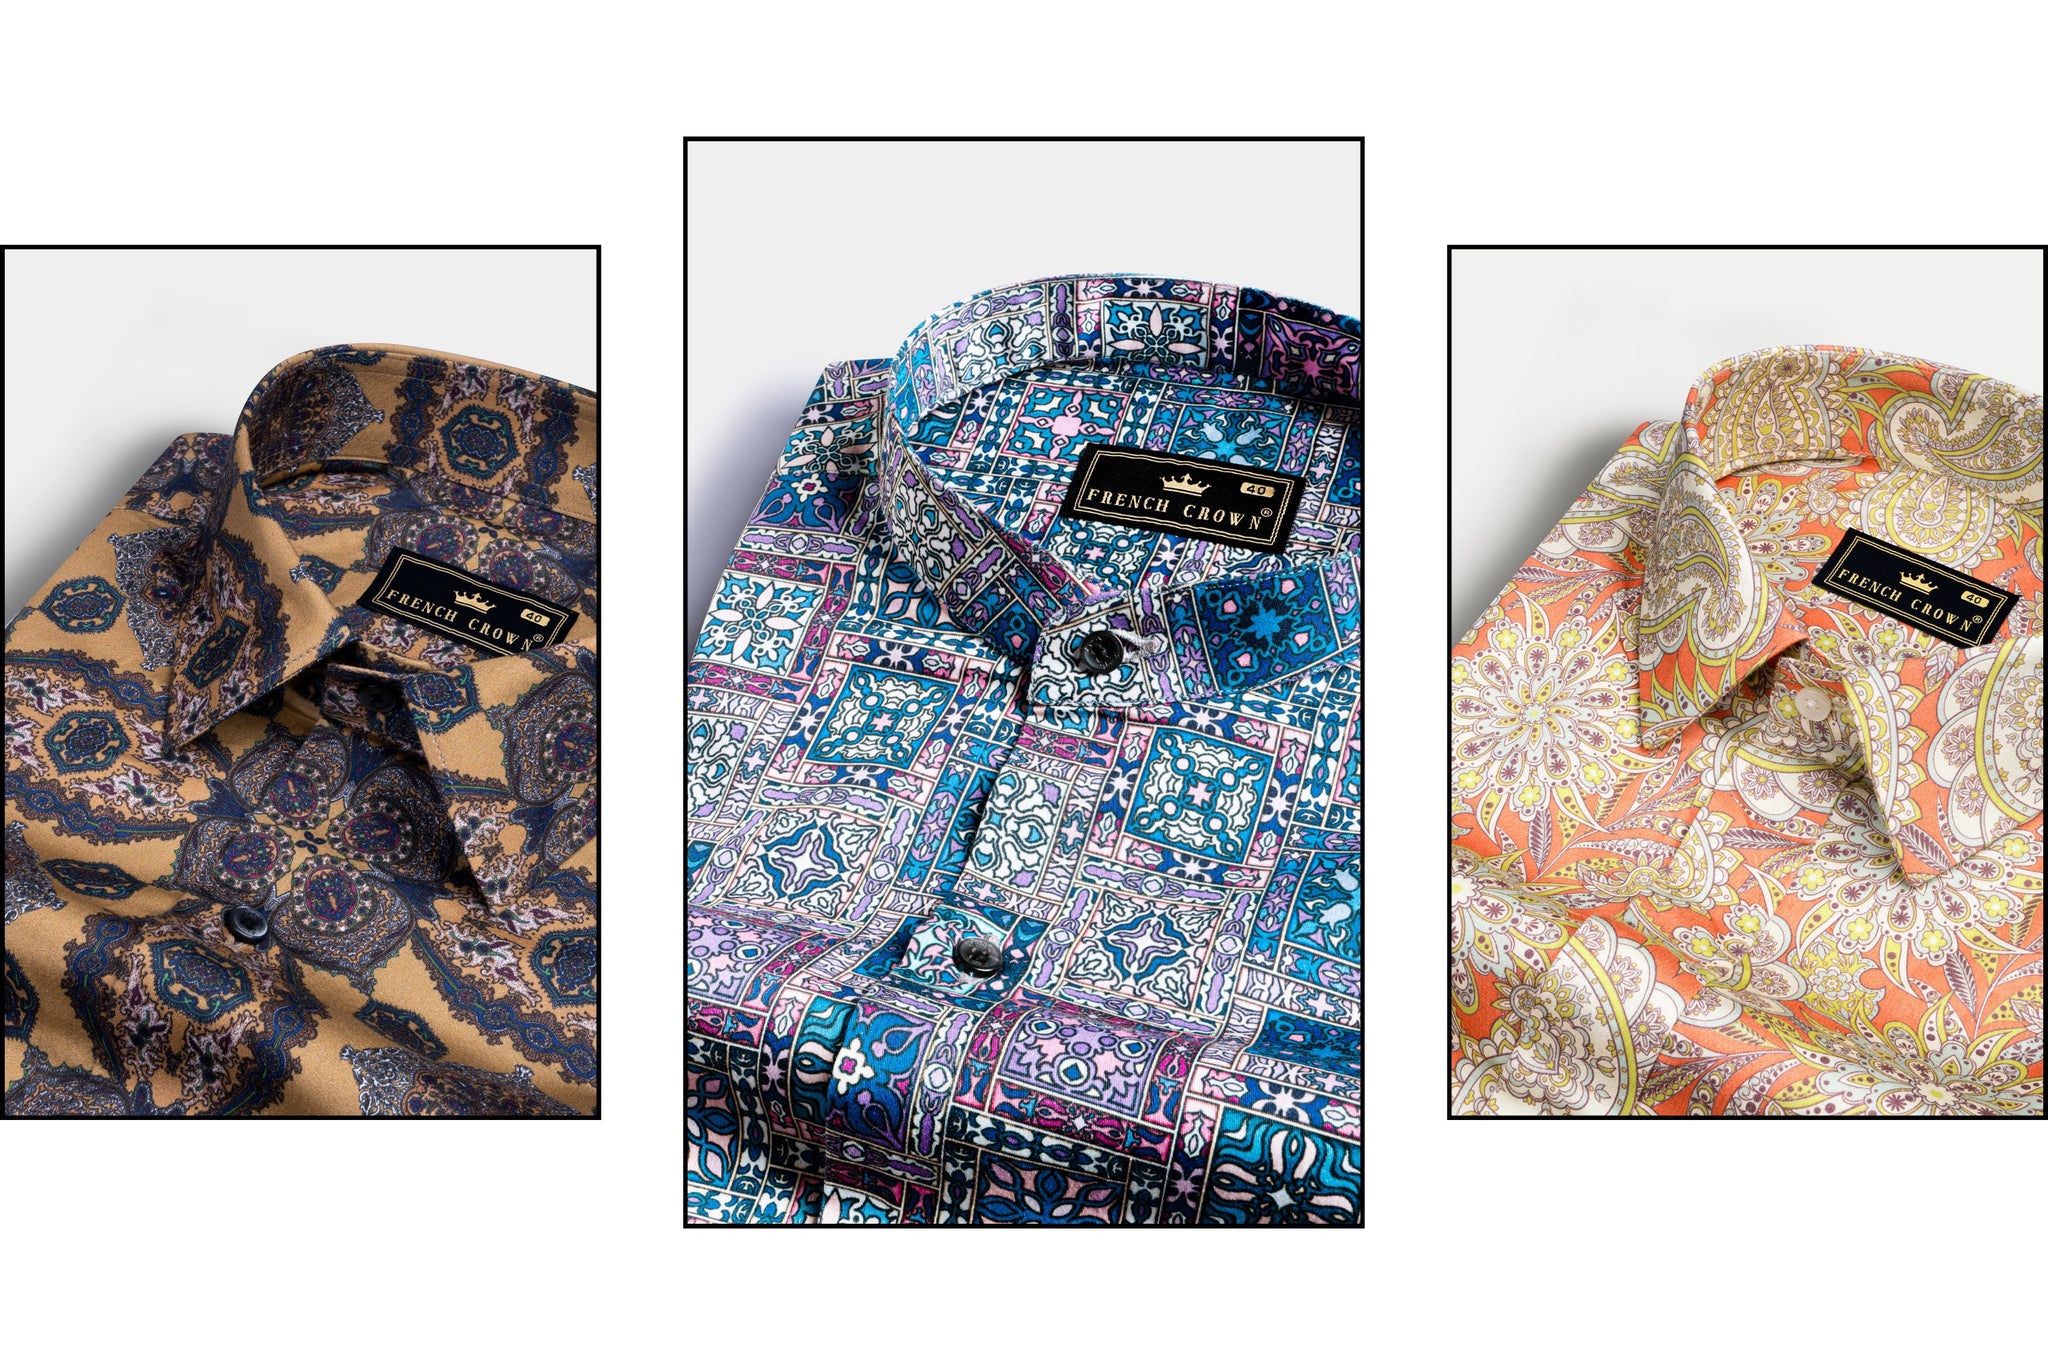 Premium Collection Floral and Printed Shirt for Men at Best Price